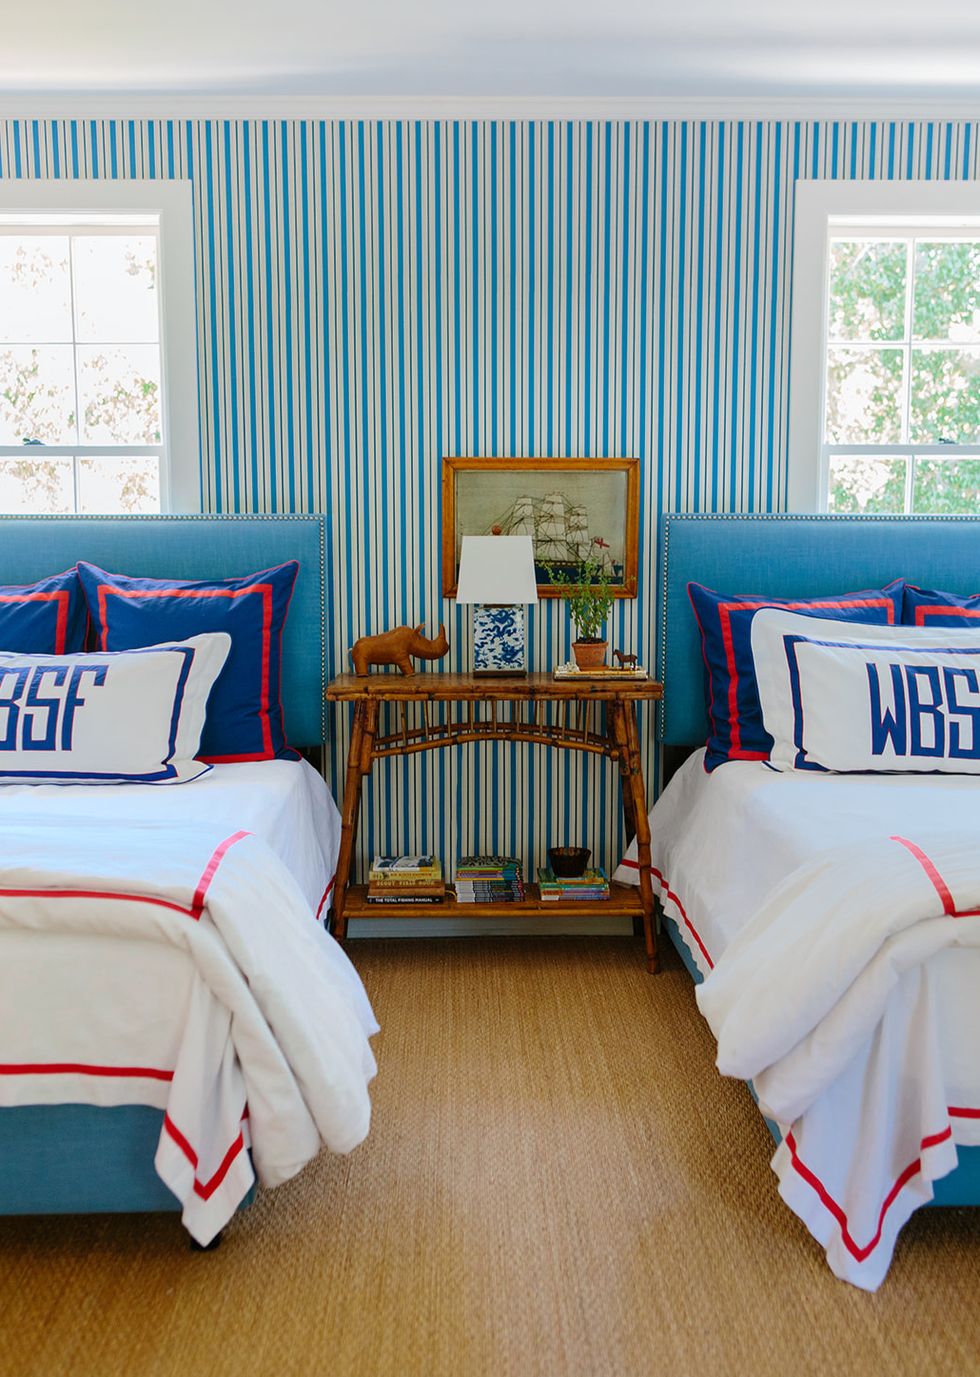 31 Sophisticated Boys' Room Ideas - How To Decorate A Boys' Bedroom